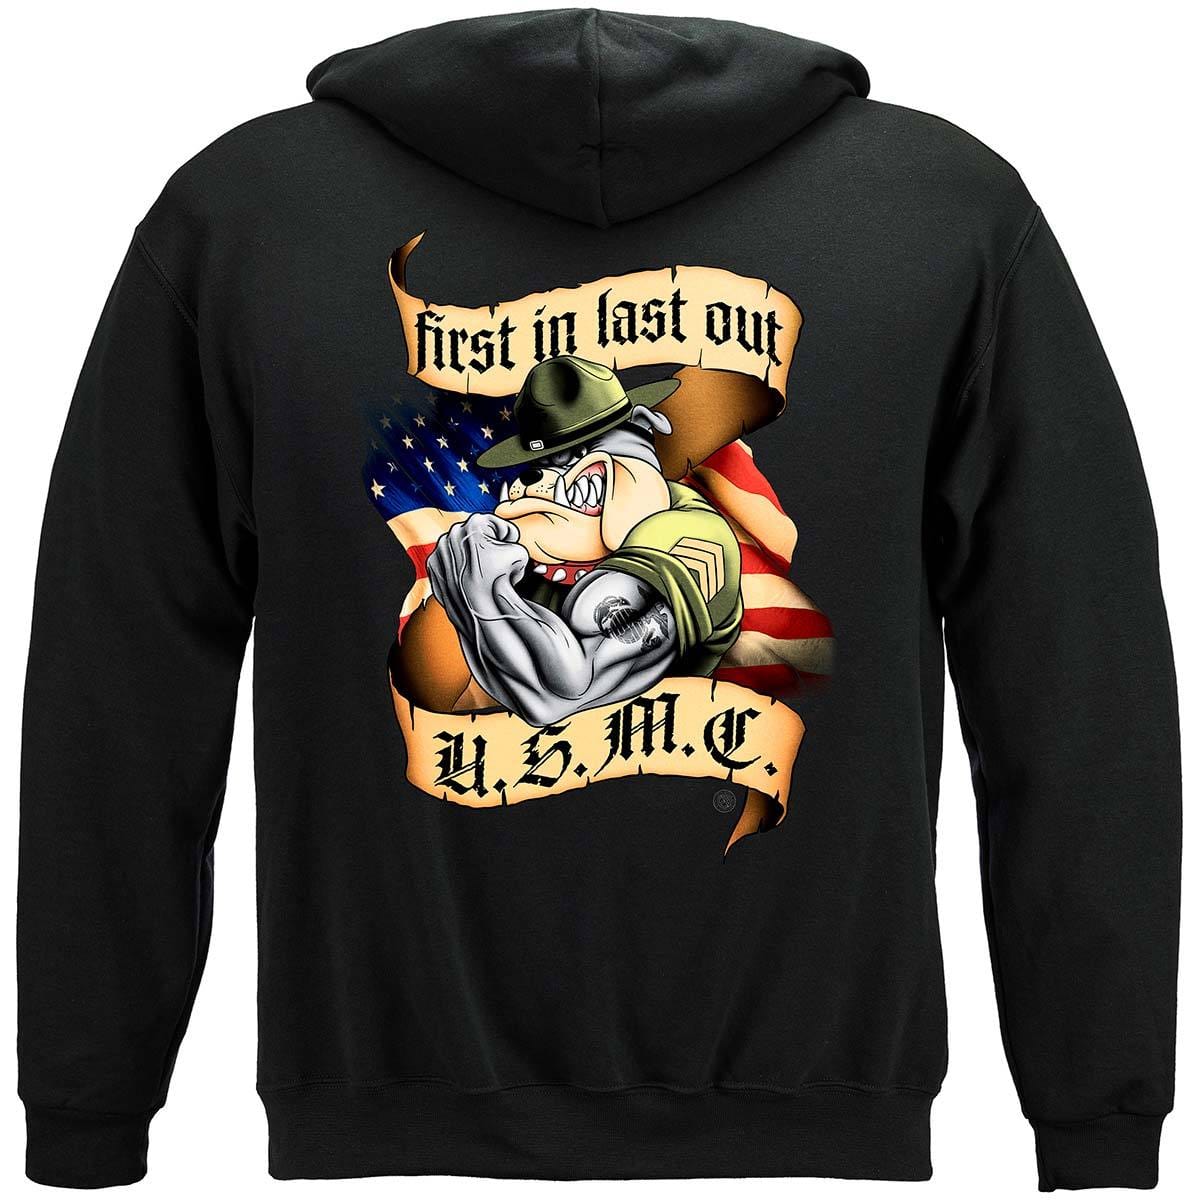 First In Last Out Marine Corps Premium Hooded Sweat Shirt